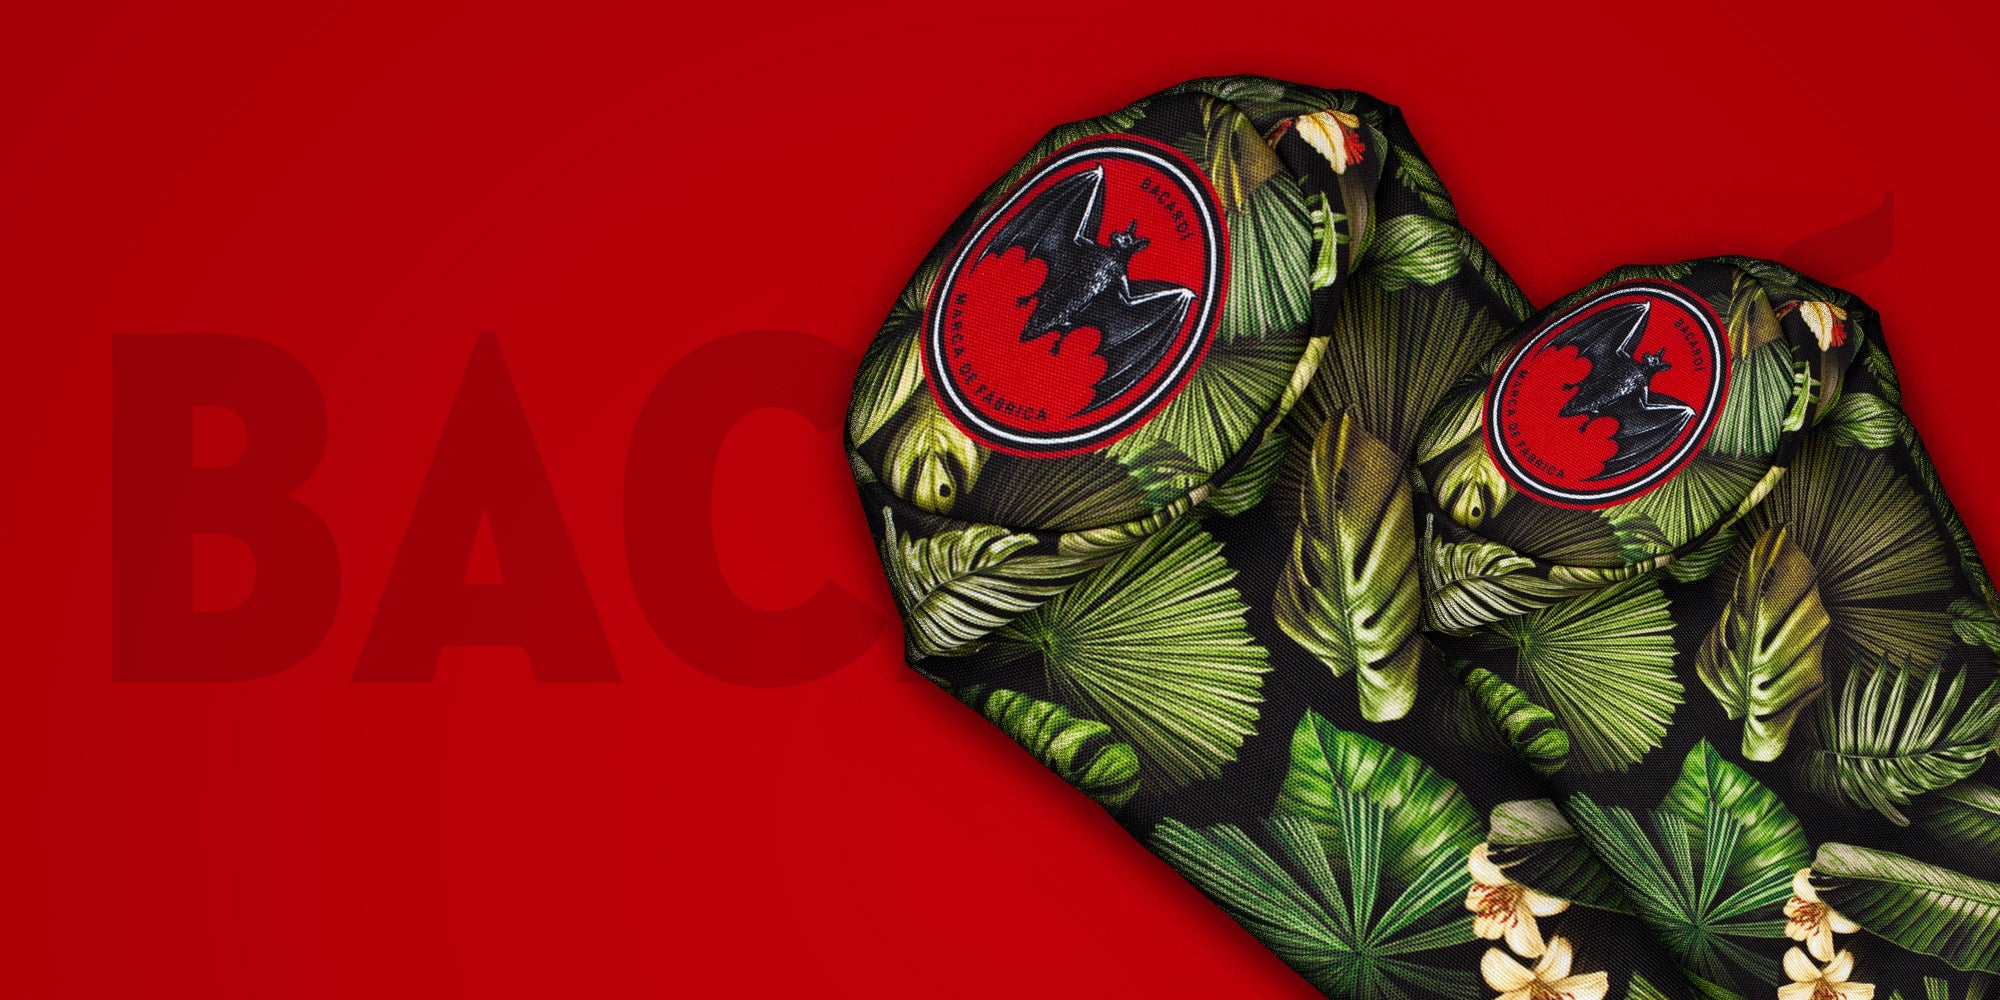 Custom tropical golf headcovers for Bacardi laying on a red background